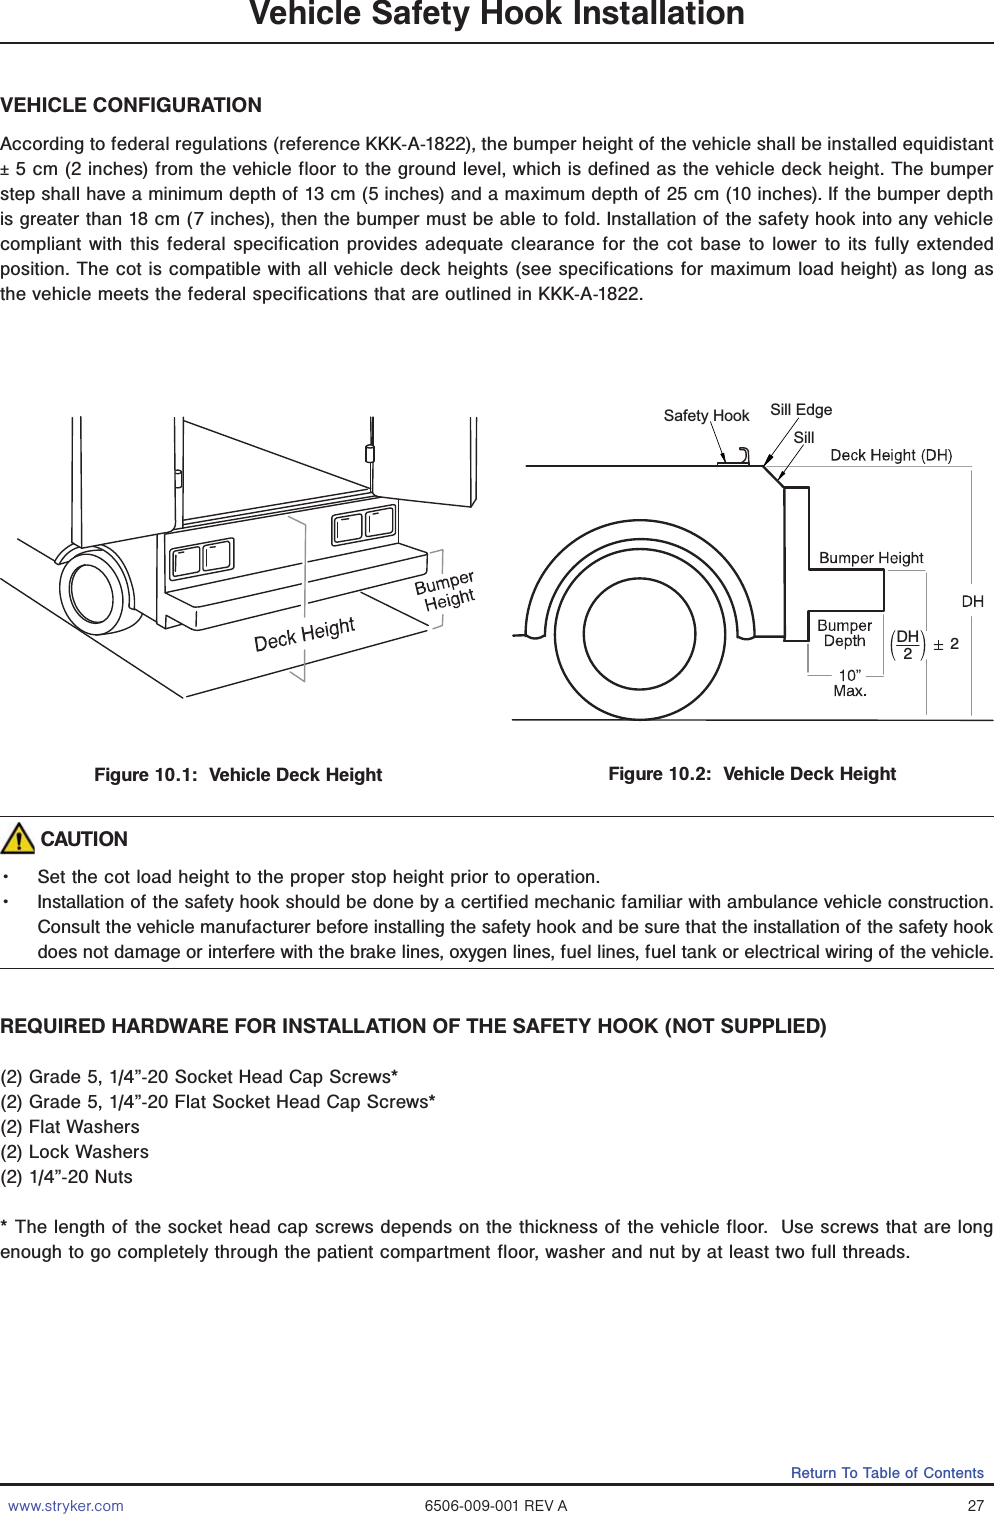 www.stryker.com 6506-009-001 REV A 27Return To Table of ContentsFigure 10.1:  Vehicle Deck HeightDH22Safety HookSillSill EdgeFigure 10.2:  Vehicle Deck HeightVehicle Safety Hook InstallationVEHICLE CONFIGURATIONAccording to federal regulations (reference KKK-A-1822), the bumper height of the vehicle shall be installed equidistant ± 5 cm (2 inches) from the vehicle floor to the ground level, which is defined as the vehicle deck height. The bumper step shall have a minimum depth of 13 cm (5 inches) and a maximum depth of 25 cm (10 inches). If the bumper depth is greater than 18 cm (7 inches), then the bumper must be able to fold. Installation of the safety hook into any vehicle compliant with this federal specification provides adequate clearance for the cot base to lower to its fully extended position. The cot is compatible with all vehicle deck heights (see specifications for maximum load height) as long as the vehicle meets the federal specifications that are outlined in KKK-A-1822. CAUTIONǨɣ Set the cot load height to the proper stop height prior to operation.Ǩɣ Installation of the safety hook should be done by a certified mechanic familiar with ambulance vehicle construction. Consult the vehicle manufacturer before installing the safety hook and be sure that the installation of the safety hook does not damage or interfere with the brake lines, oxygen lines, fuel lines, fuel tank or electrical wiring of the vehicle.REQUIRED HARDWARE FOR INSTALLATION OF THE SAFETY HOOK (NOT SUPPLIED)(2) Grade 5, 1/4”-20 Socket Head Cap Screws*(2) Grade 5, 1/4”-20 Flat Socket Head Cap Screws*(2) Flat Washers (2) Lock Washers(2) 1/4”-20 Nuts* The length of the socket head cap screws depends on the thickness of the vehicle floor.  Use screws that are long enough to go completely through the patient compartment floor, washer and nut by at least two full threads.